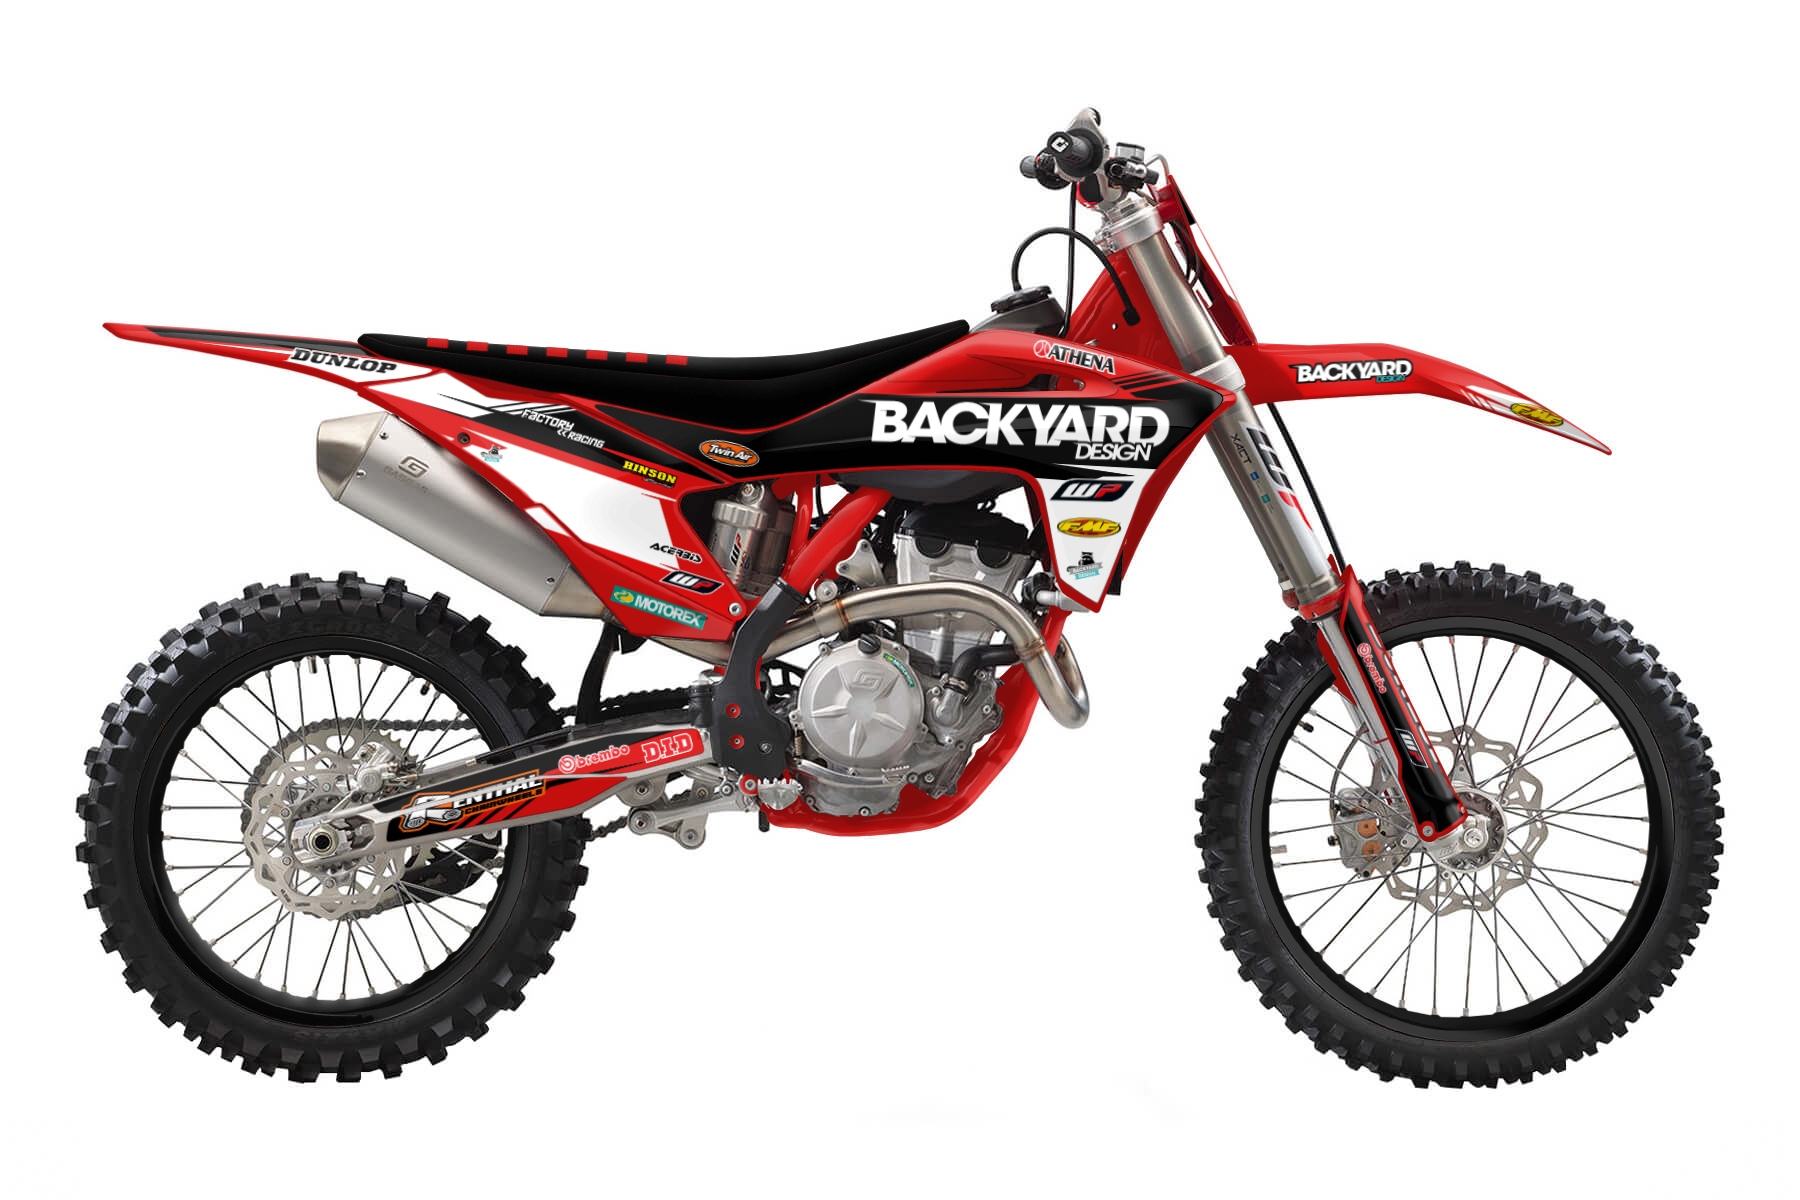 GasGas MC 450F
MX Graphic Kits

Pure power combines with a dynamic and precise handling. This is the GasGas masterclass. The best technical features are paired with a mouth dropping performance here.